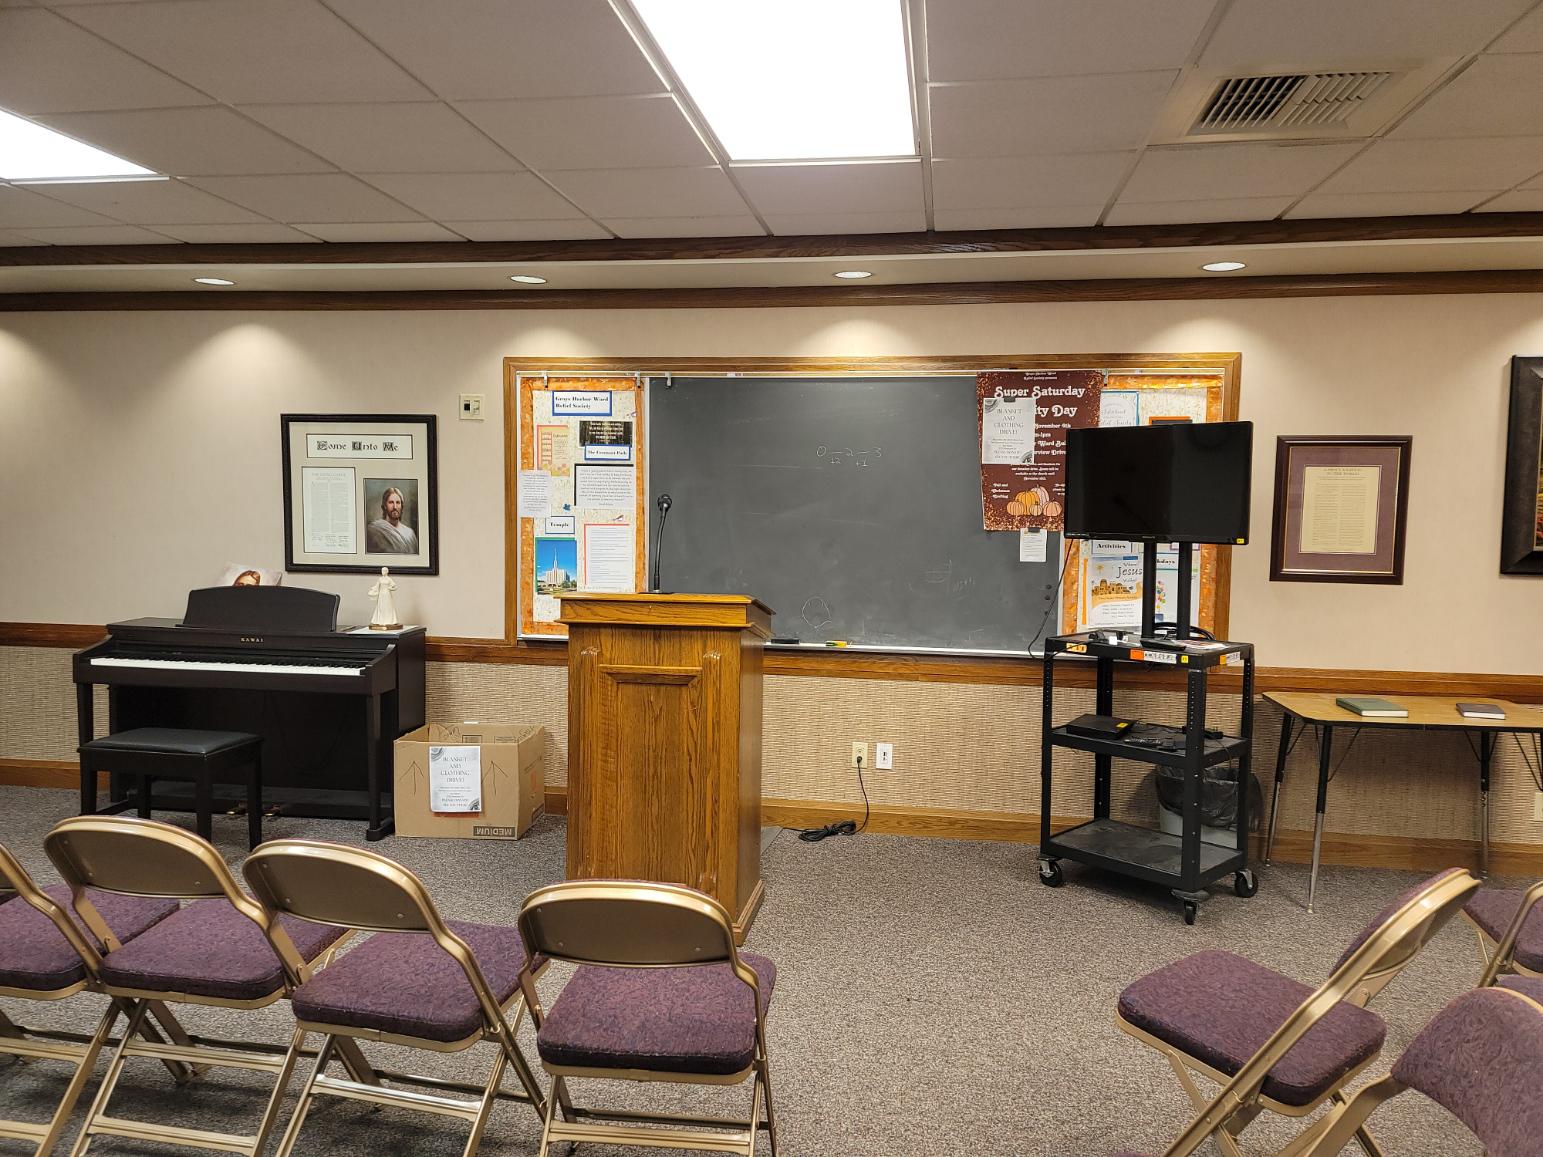 Relief Society room, or women's class, of The Church of Jesus Christ of Latter-day Saints